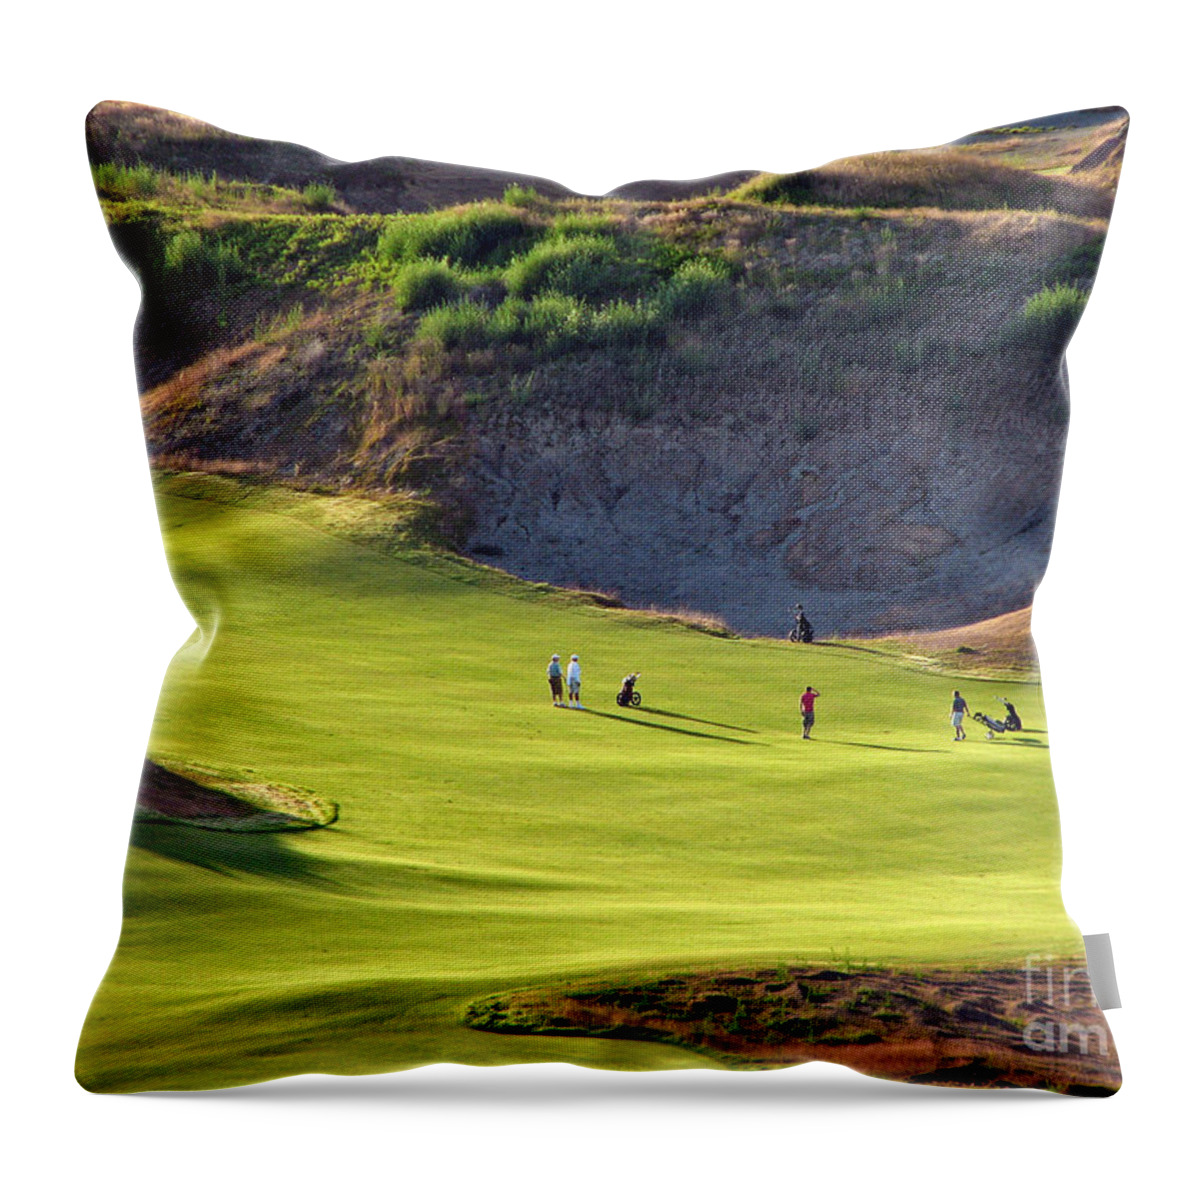 Chambers Creek Throw Pillow featuring the photograph May I Play Through? - Chambers Bay Golf Course by Chris Anderson